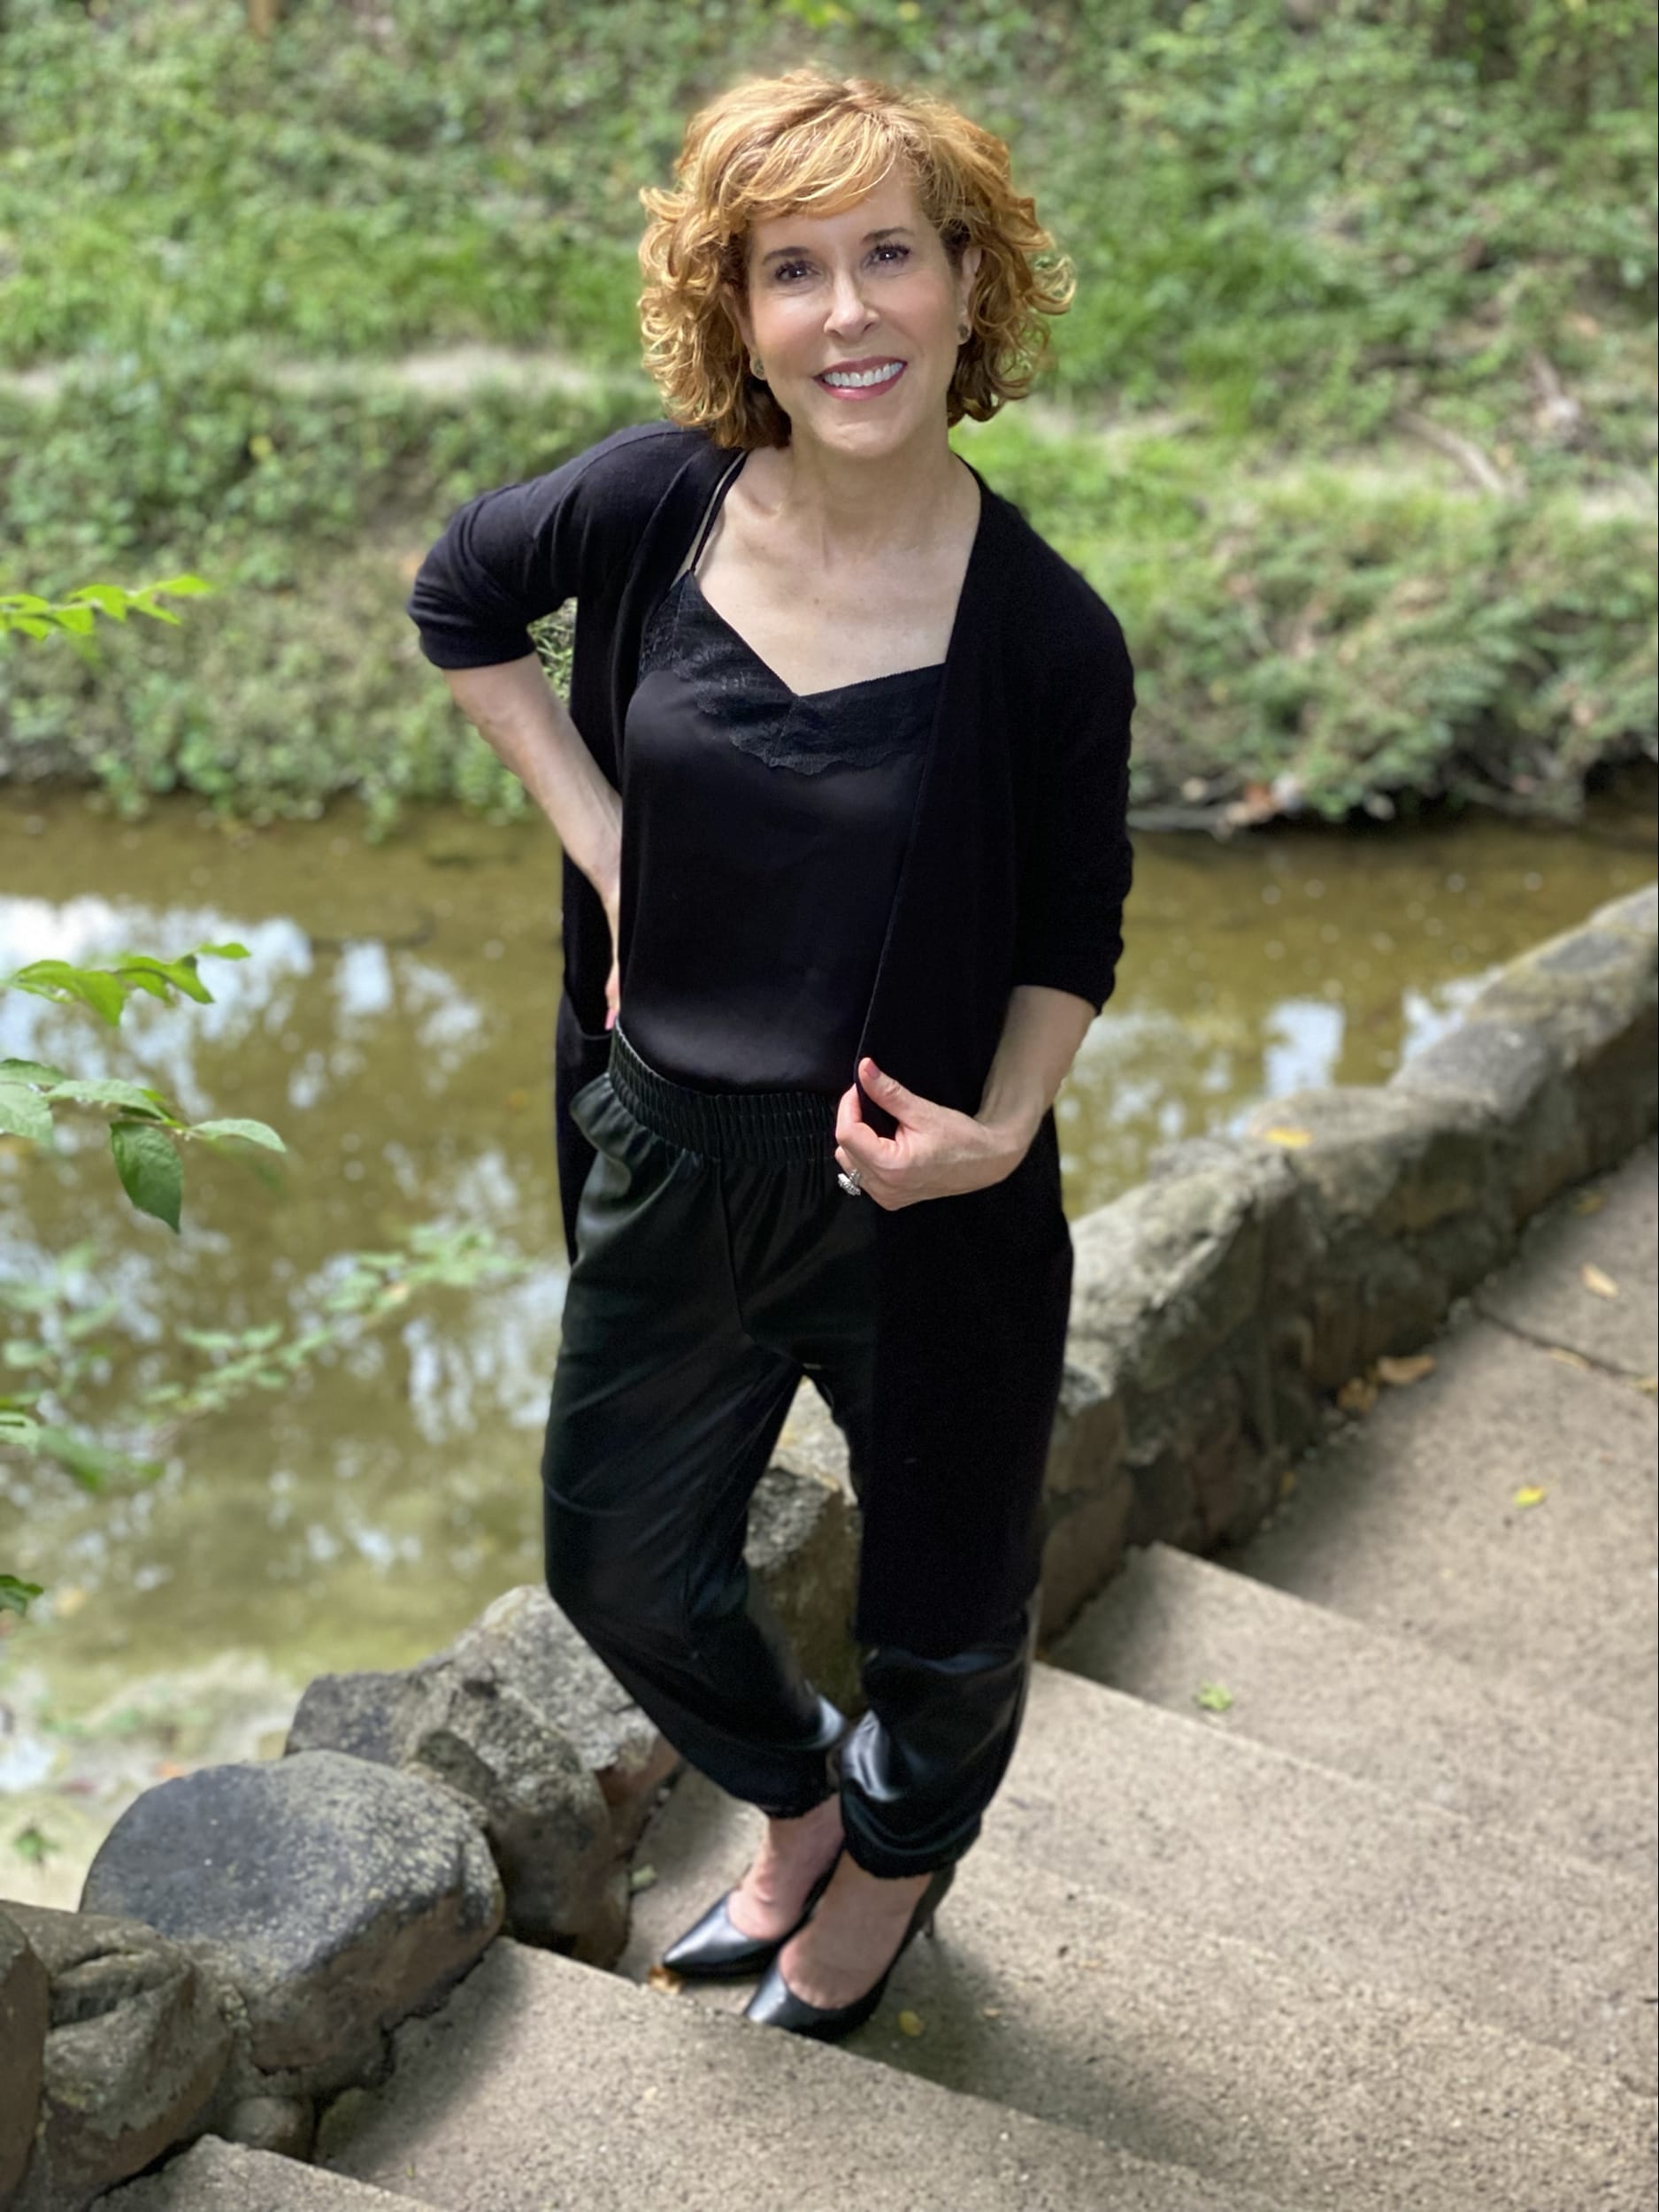 woman over 50 posing by a stream wearing nordstrom made brands spring top styles like this Eyelash Lace Trim Satin Crop Camisole black cardigan and black joggers